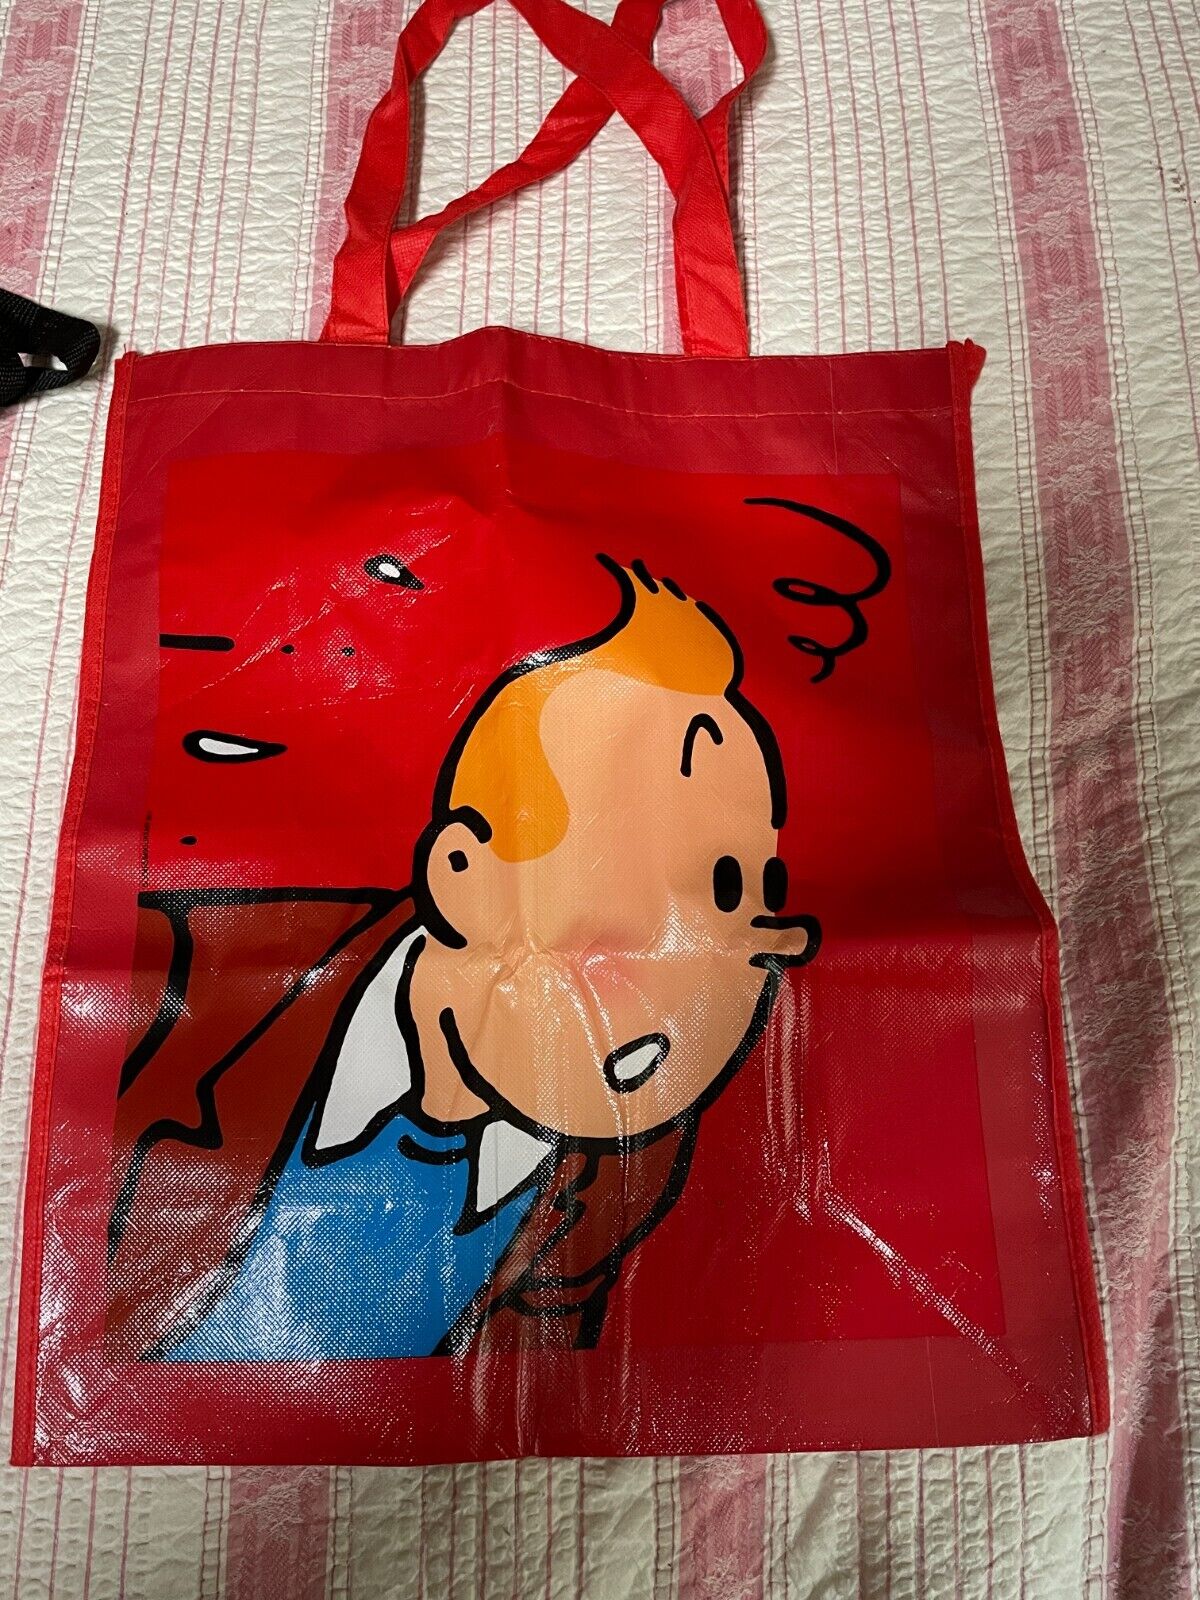 Tintin and snowy red shopper bag